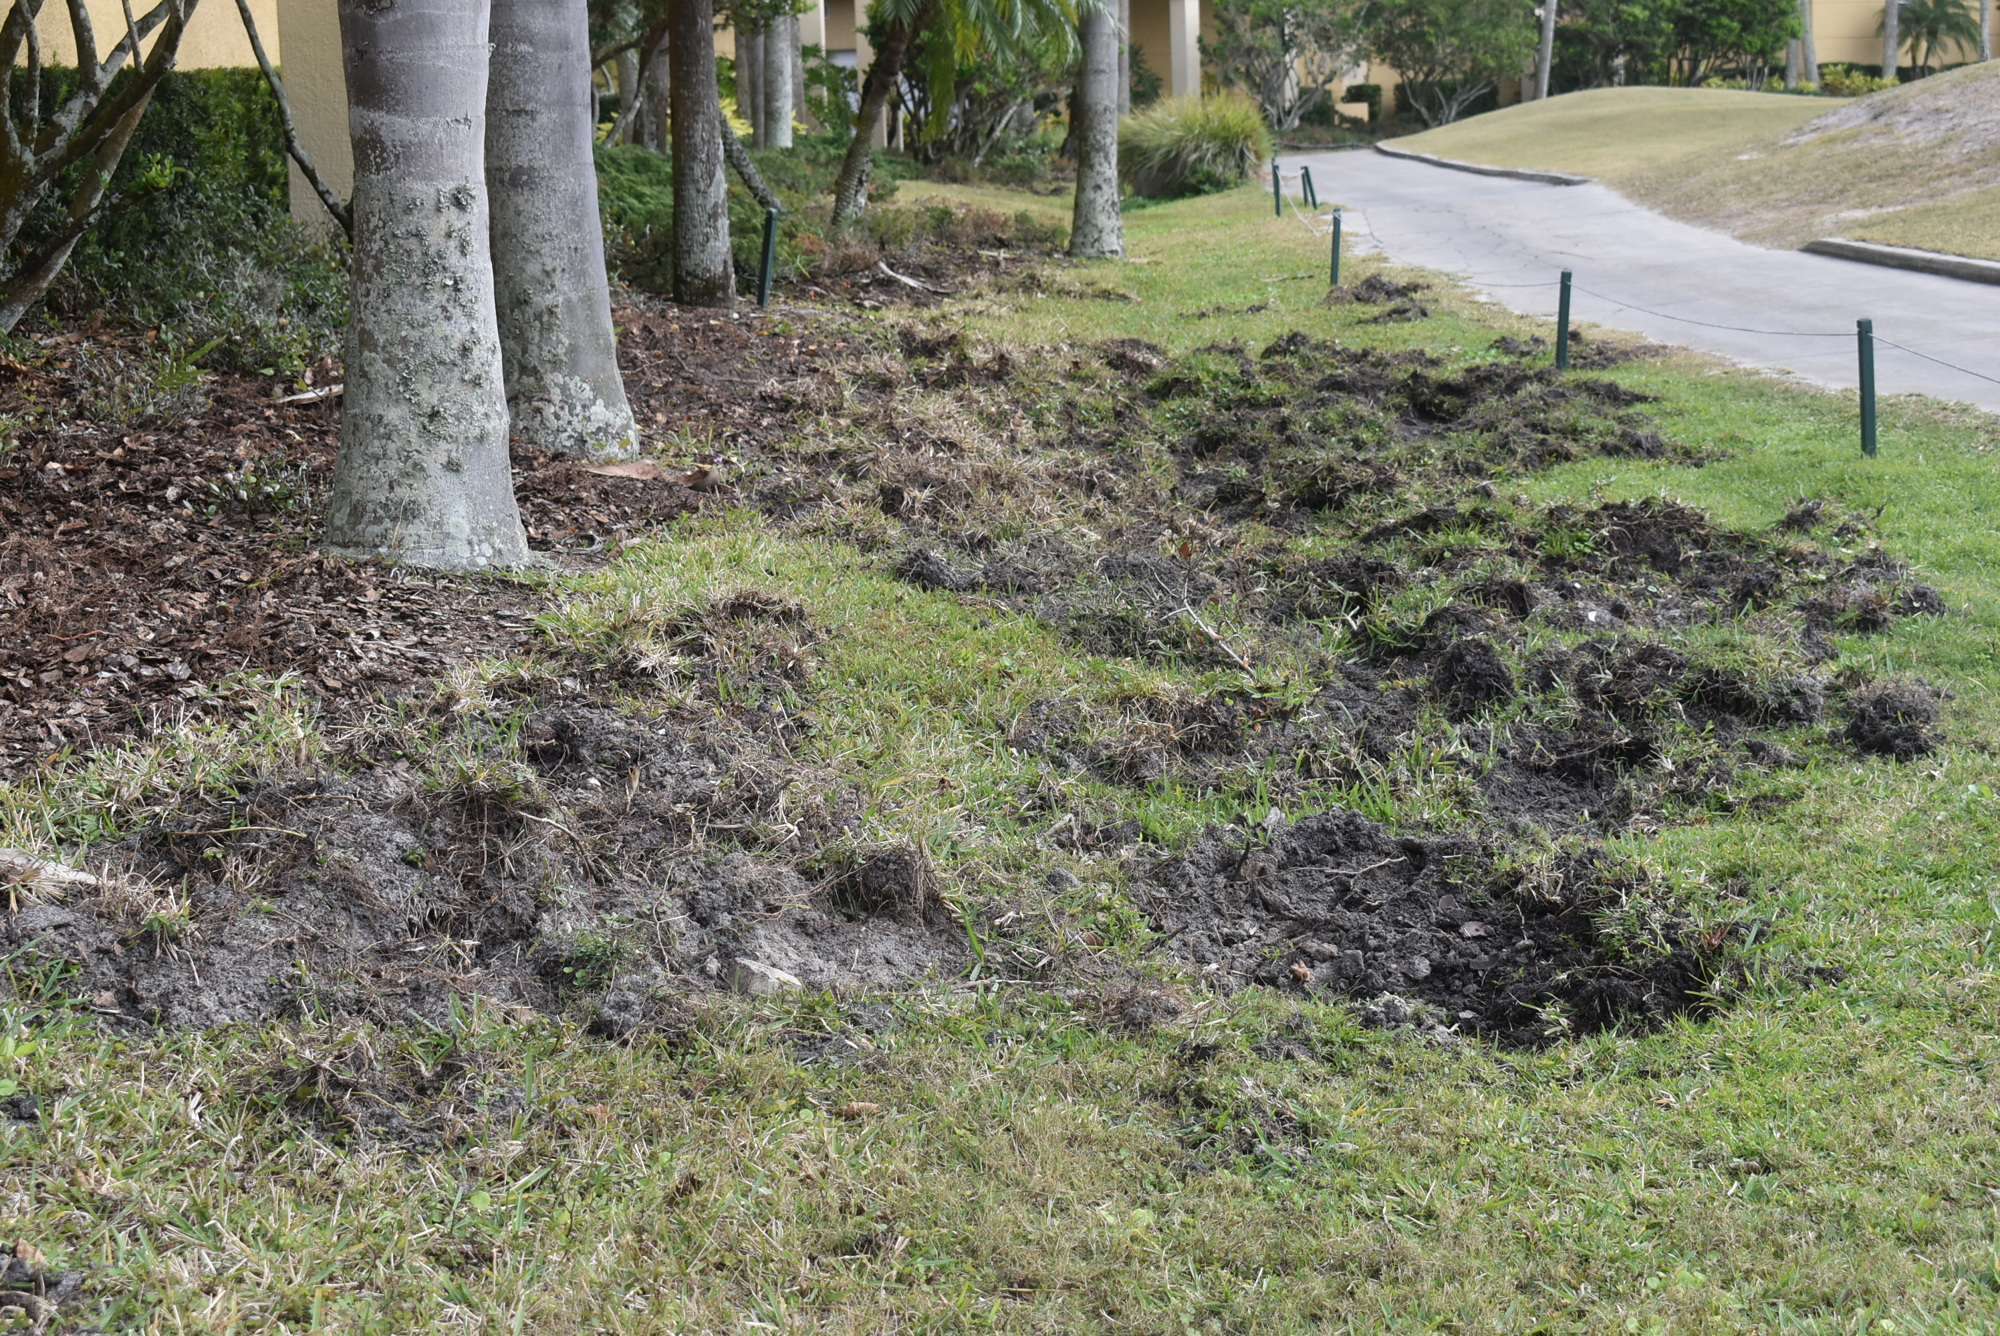 Wild pigs have been causing landscape damage recently in Lakewood Ranch communities such as Edgewater.